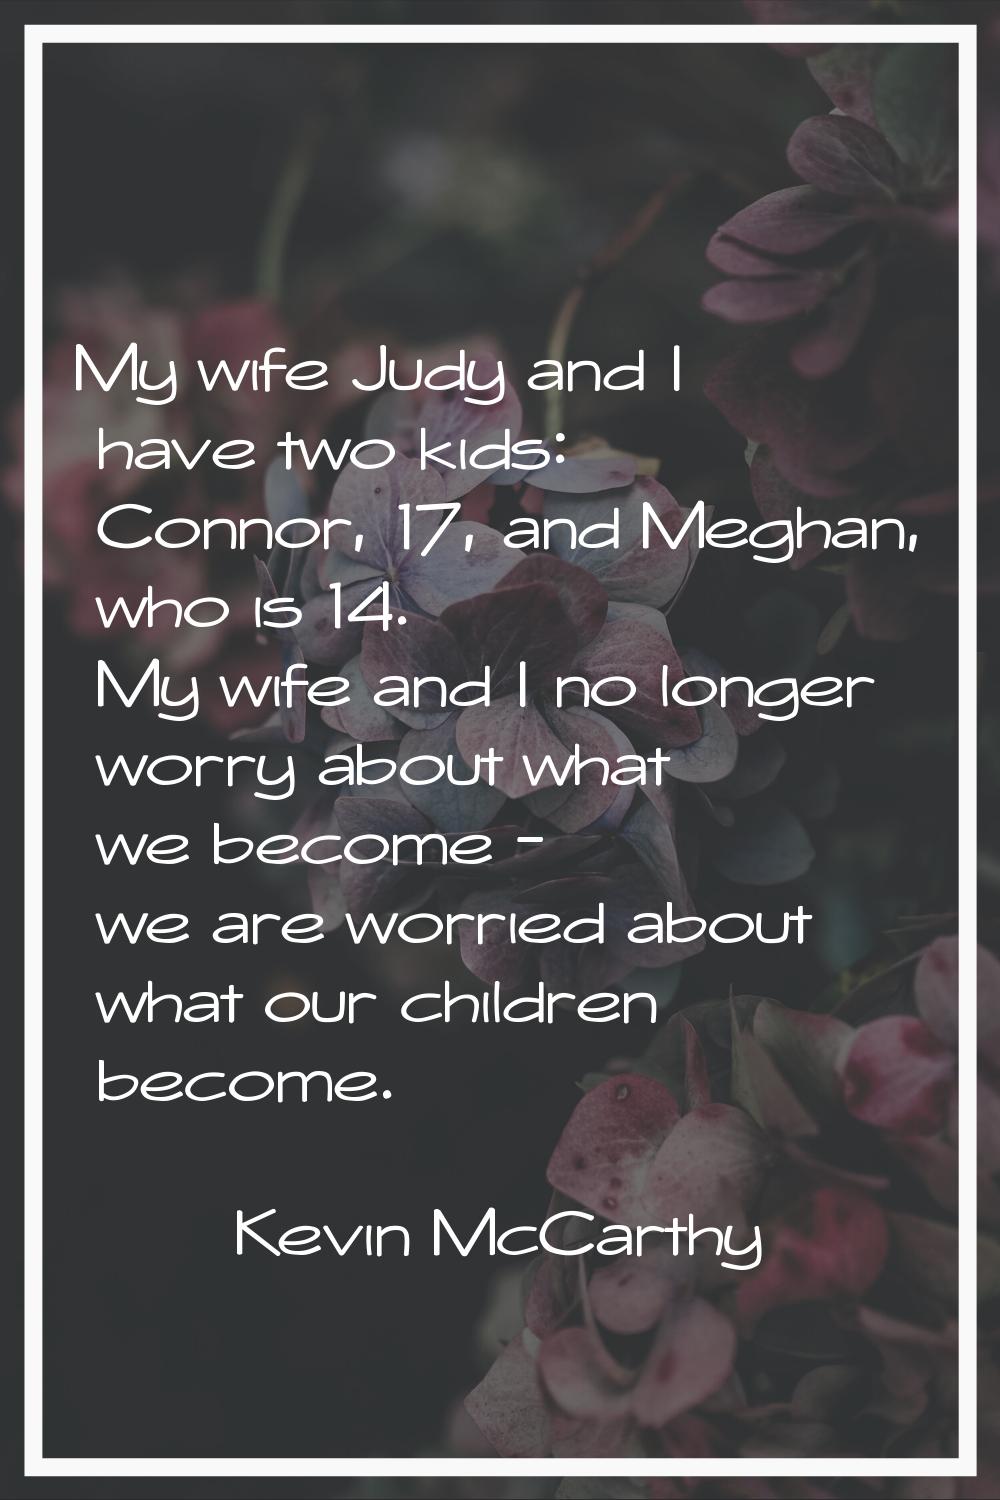 My wife Judy and I have two kids: Connor, 17, and Meghan, who is 14. My wife and I no longer worry 